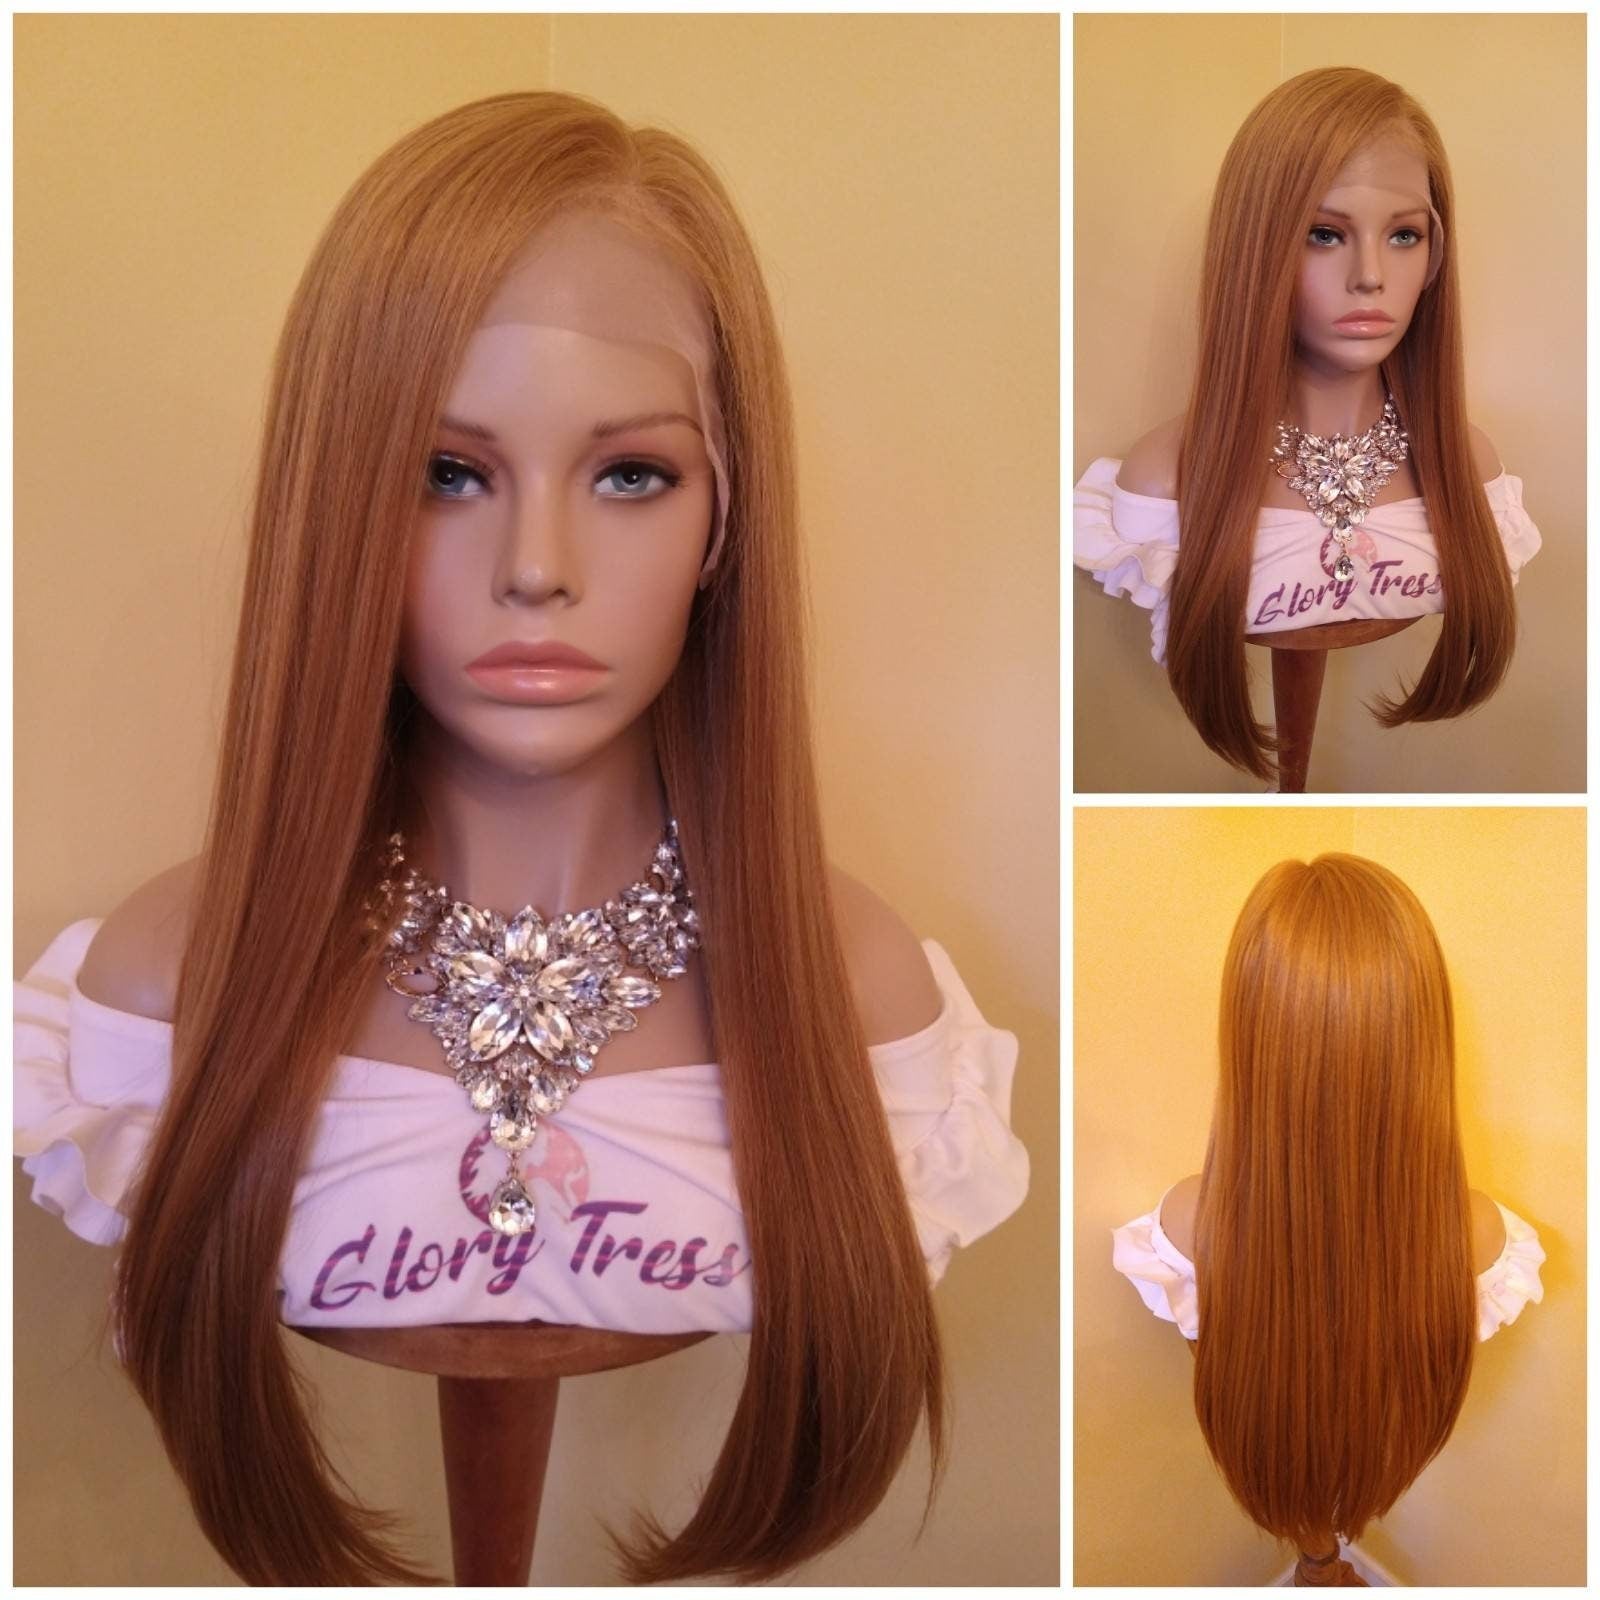 Blonde Lace Frontal Wig | Straight Wig With HD Lace | Human Blend Wig, 13x6 Free Parting | Glory Tress Wigs, Alopecia Wig // GINGERBREAD